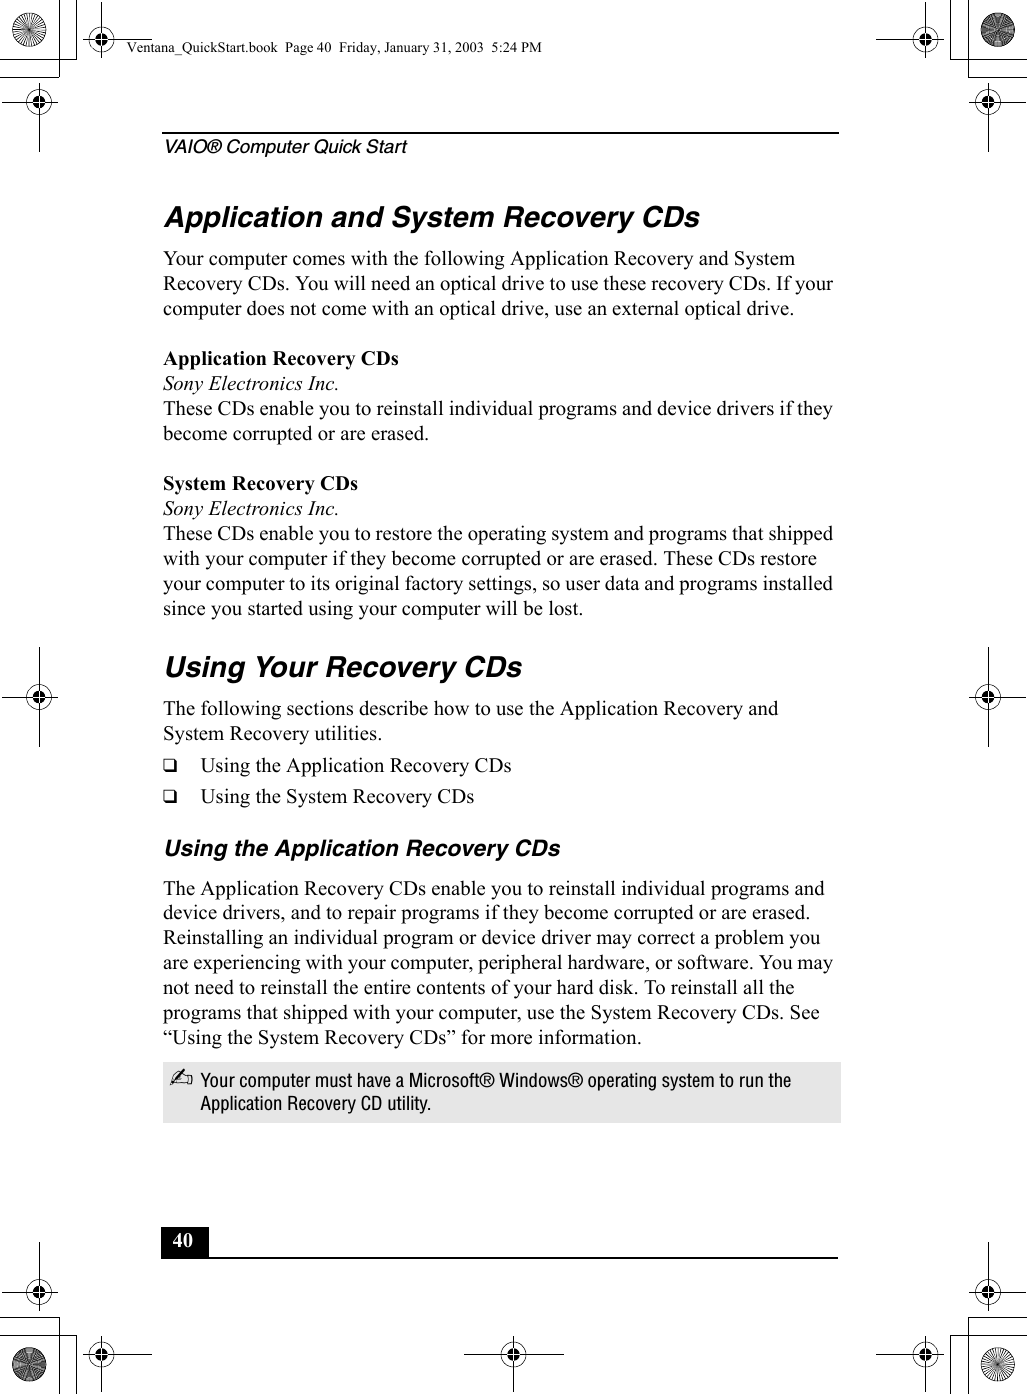 VAIO® Computer Quick Start40Application and System Recovery CDsYour computer comes with the following Application Recovery and System Recovery CDs. You will need an optical drive to use these recovery CDs. If your computer does not come with an optical drive, use an external optical drive. Application Recovery CDsSony Electronics Inc.These CDs enable you to reinstall individual programs and device drivers if they become corrupted or are erased.System Recovery CDsSony Electronics Inc.These CDs enable you to restore the operating system and programs that shipped with your computer if they become corrupted or are erased. These CDs restore your computer to its original factory settings, so user data and programs installed since you started using your computer will be lost.Using Your Recovery CDsThe following sections describe how to use the Application Recovery and System Recovery utilities. ❑Using the Application Recovery CDs❑Using the System Recovery CDsUsing the Application Recovery CDsThe Application Recovery CDs enable you to reinstall individual programs and device drivers, and to repair programs if they become corrupted or are erased. Reinstalling an individual program or device driver may correct a problem you are experiencing with your computer, peripheral hardware, or software. You may not need to reinstall the entire contents of your hard disk. To reinstall all the programs that shipped with your computer, use the System Recovery CDs. See “Using the System Recovery CDs” for more information.✍Your computer must have a Microsoft® Windows® operating system to run the Application Recovery CD utility.Ventana_QuickStart.book  Page 40  Friday, January 31, 2003  5:24 PM